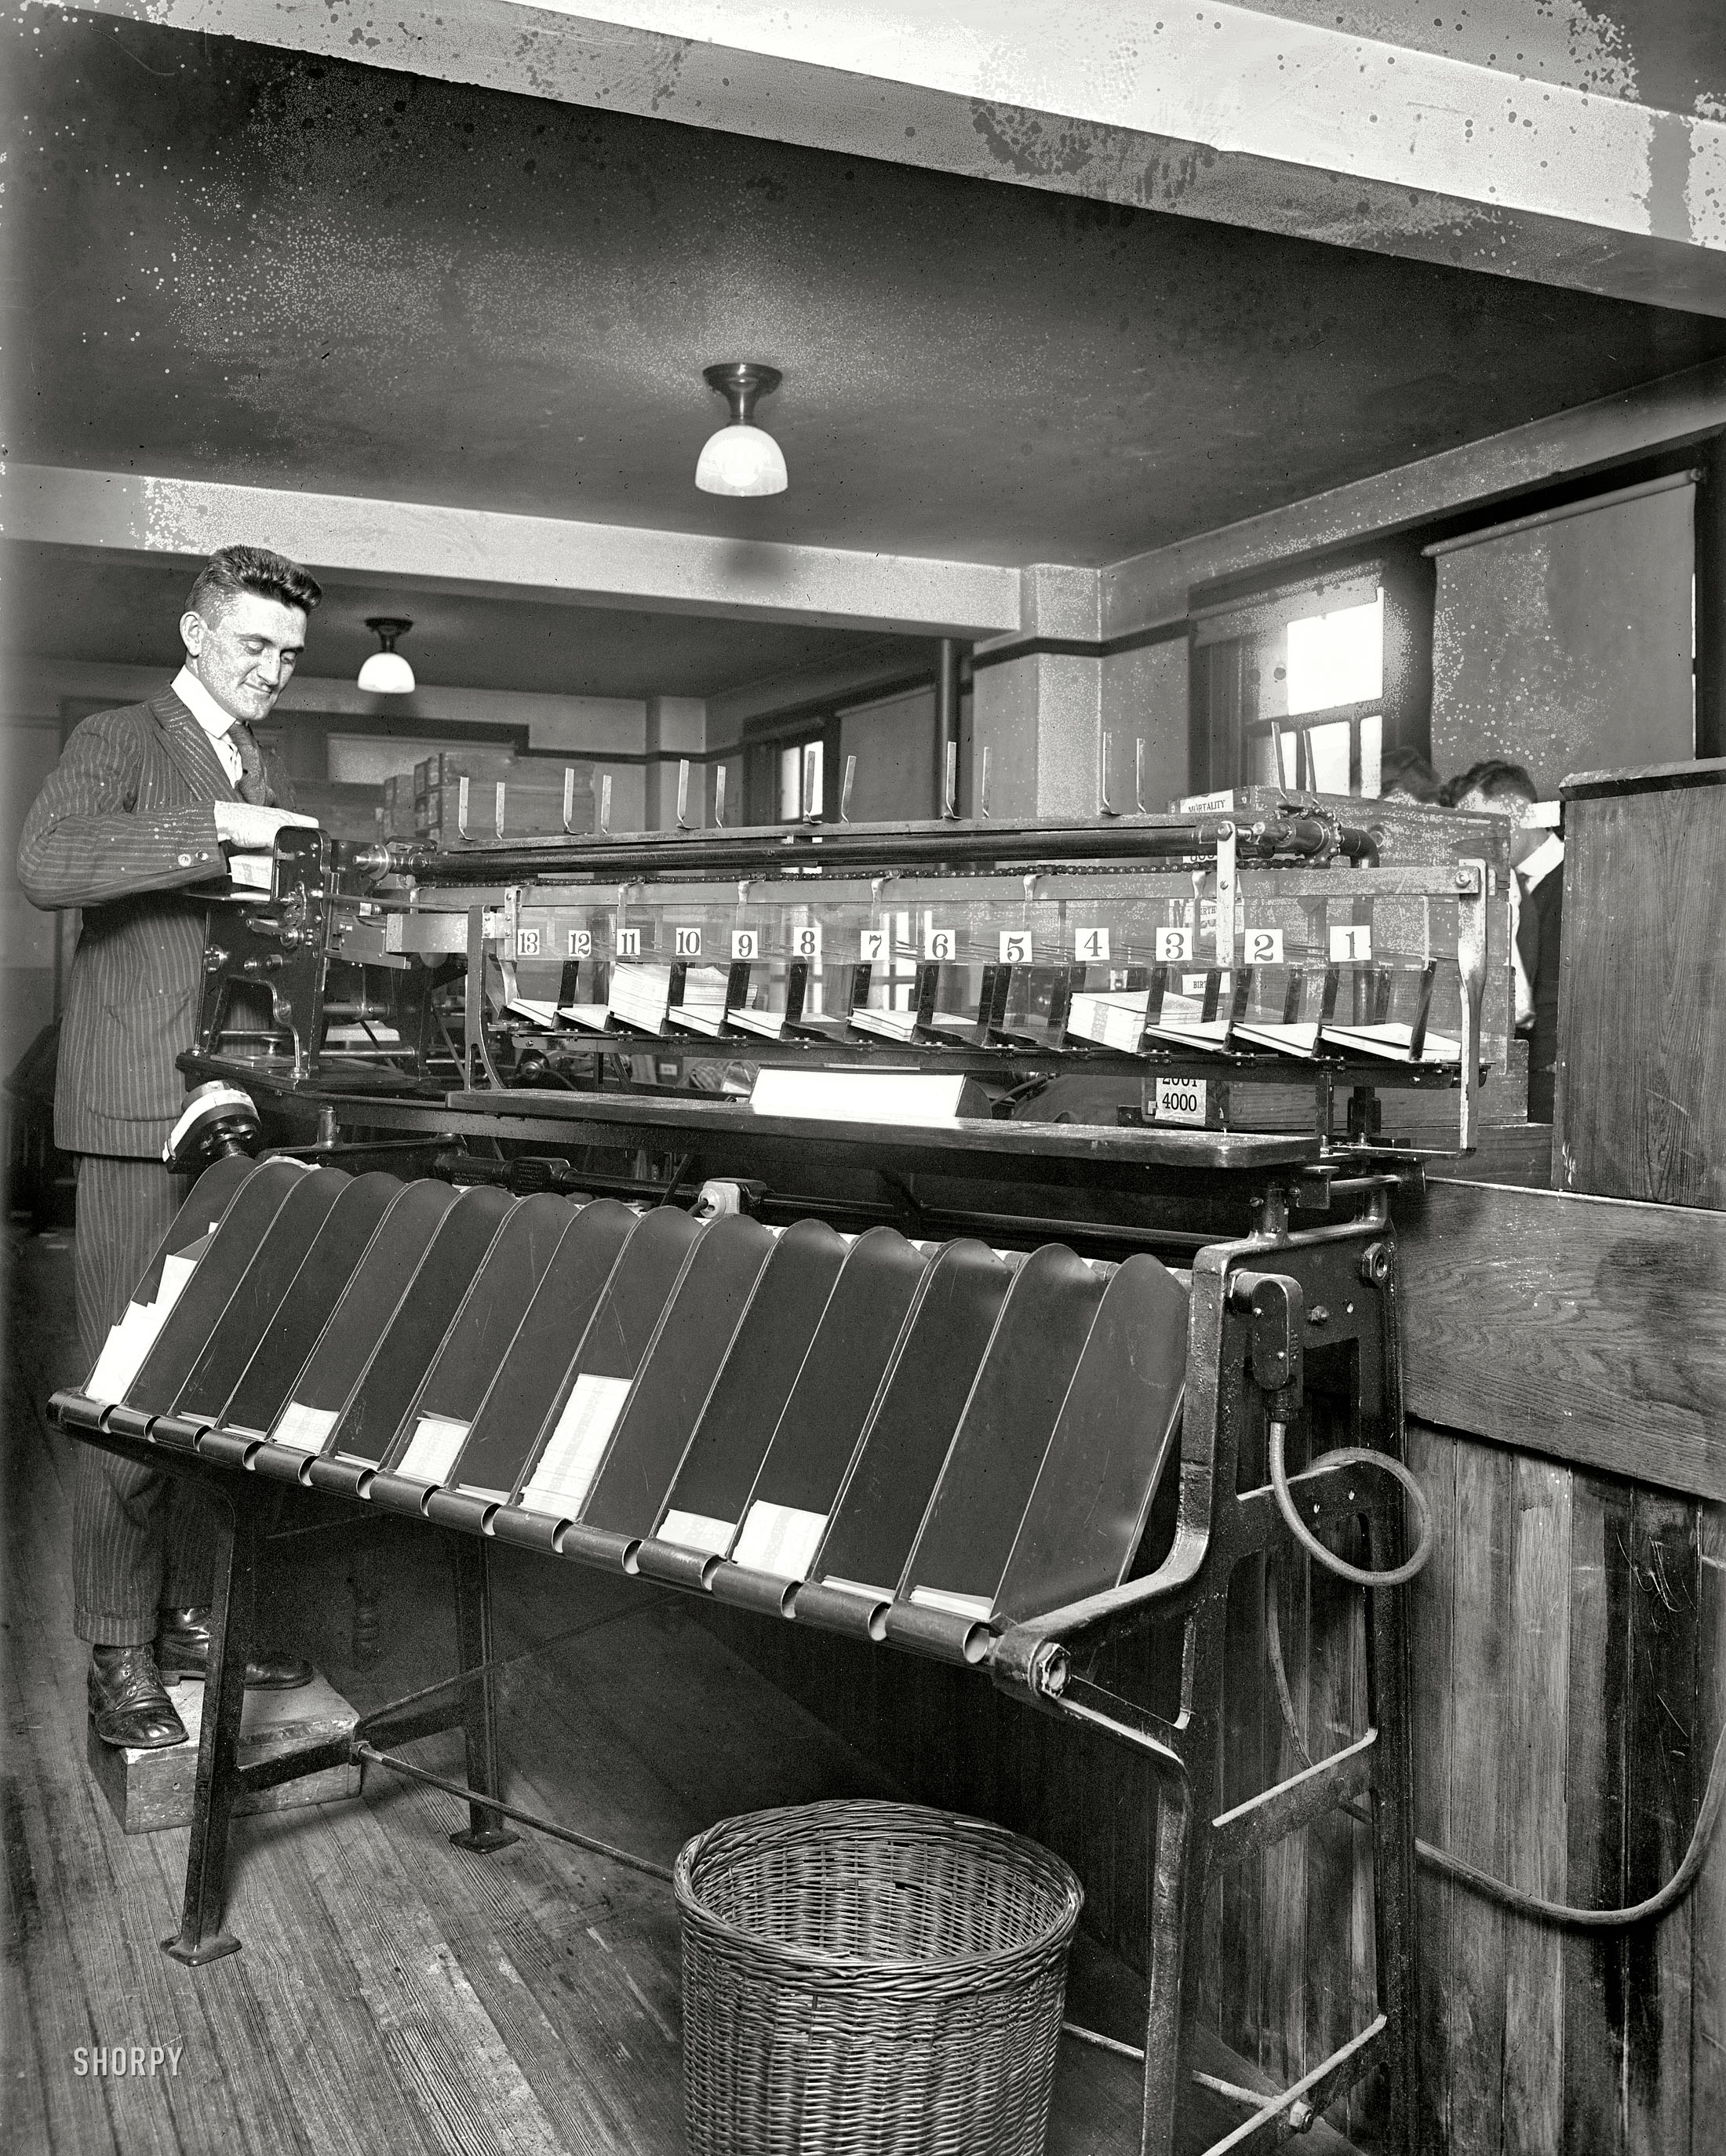 December 1919. Washington, D.C. "Sorting machine, U.S. Census." Getting ready to tabulate the 1920 Census. Under-height operators will please furnish their own boxes.  National Photo Company Collection glass negative. View full size.